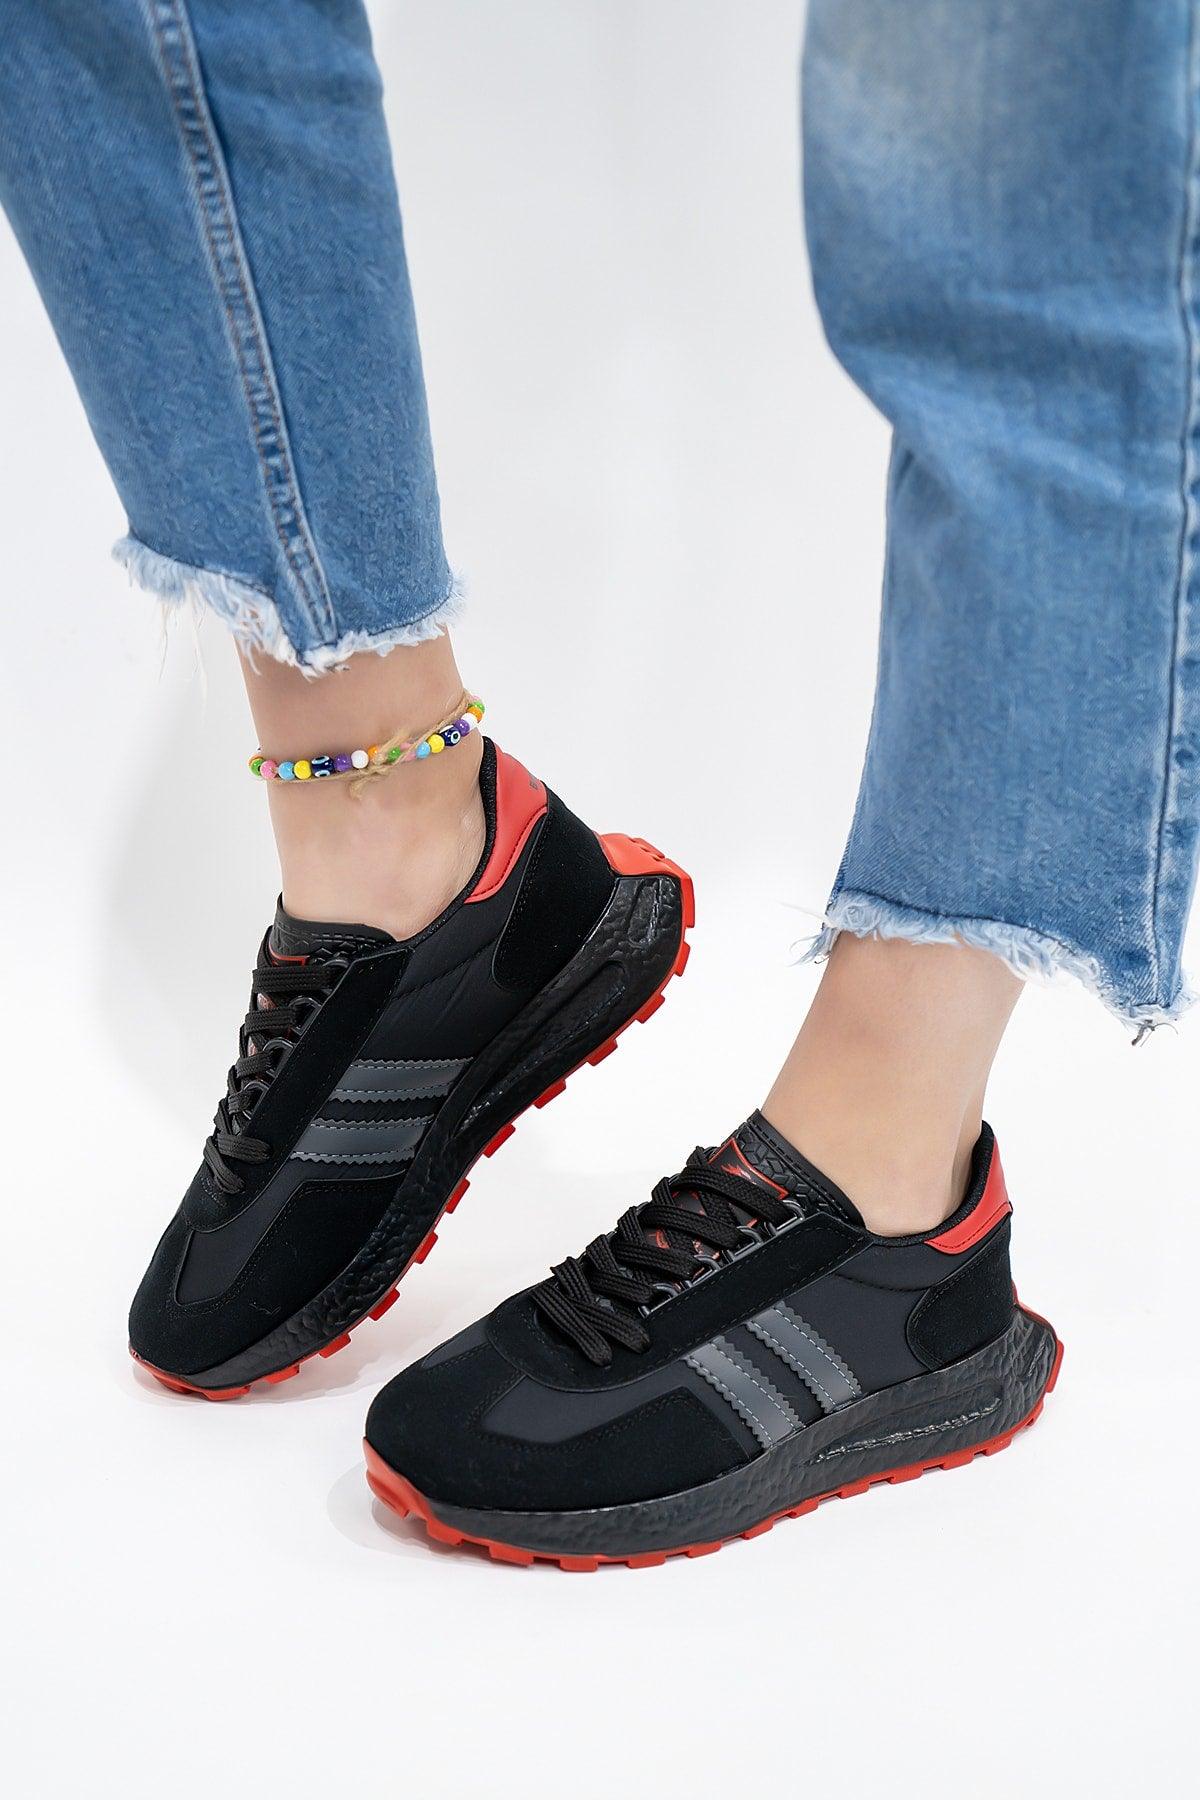 Unisex Casual Casual Sports Shoes Sneaker - Swordslife